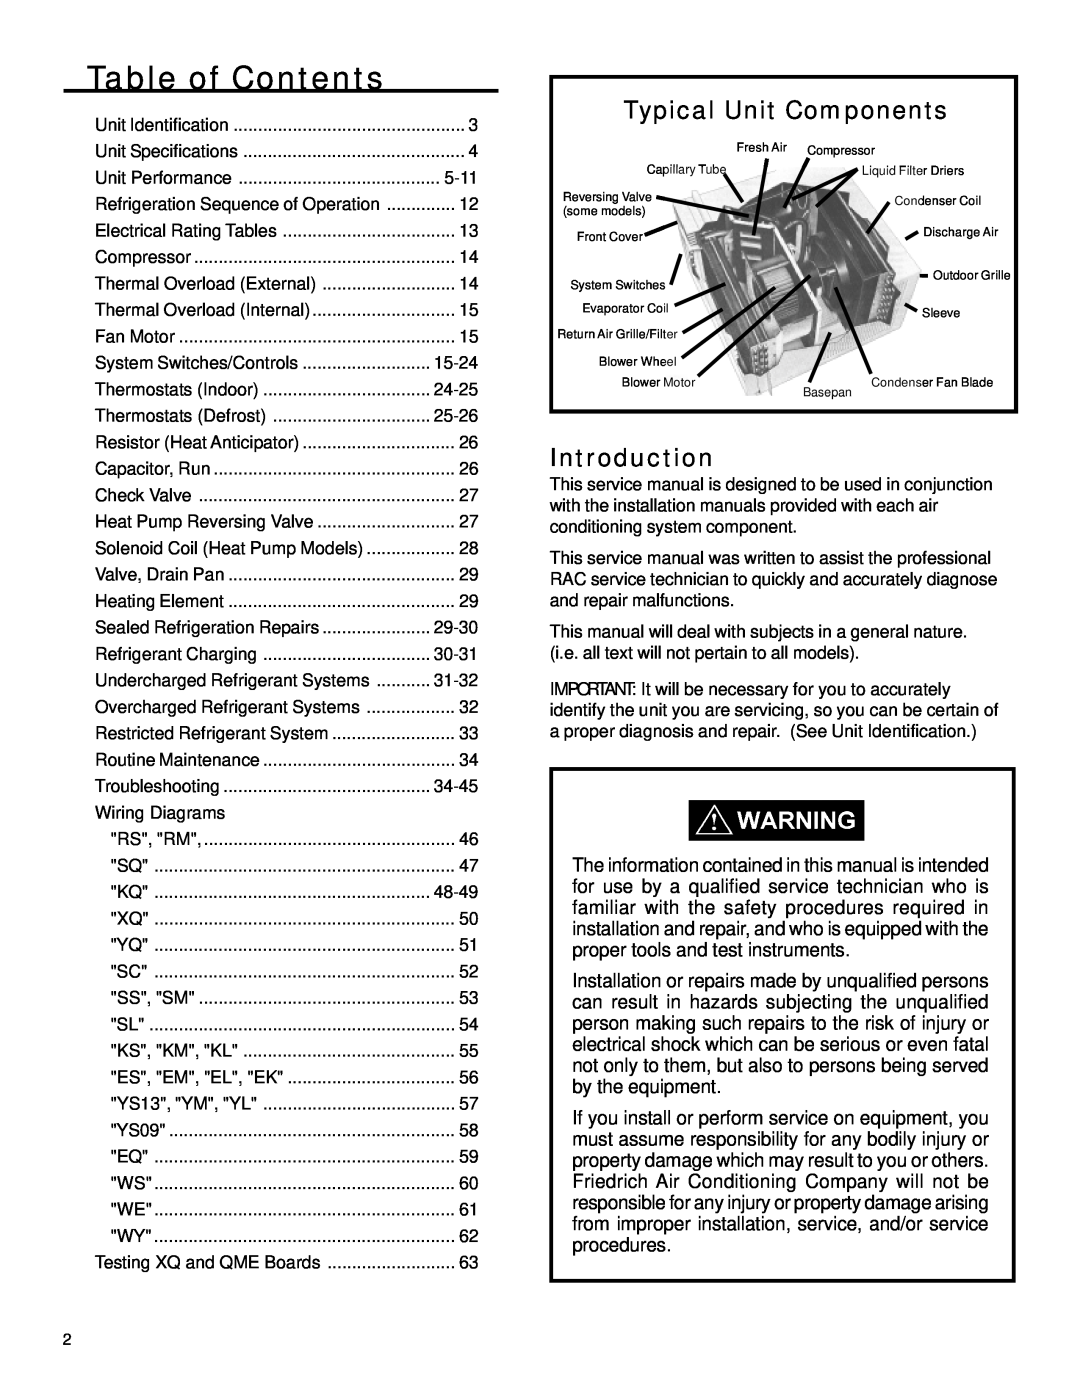 Friedrich 2003 service manual Table of Contents, Typical Unit Components, Introduction 